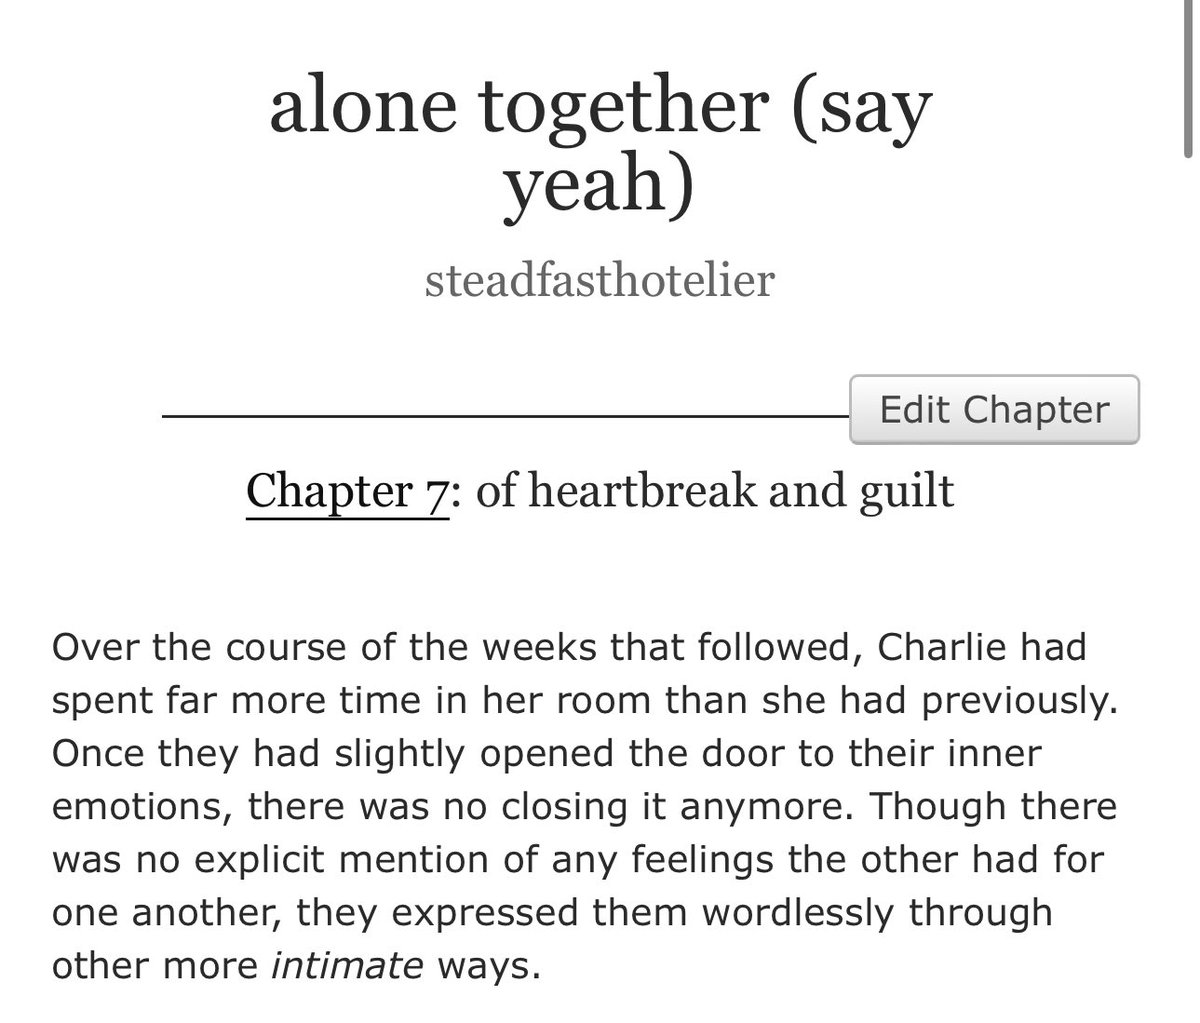 chapter 7 of alone together (say yeah) is out now!

archiveofourown.org/works/54383305…

#radiobelle #charlastor #alastorxcharlie #charliexalastor